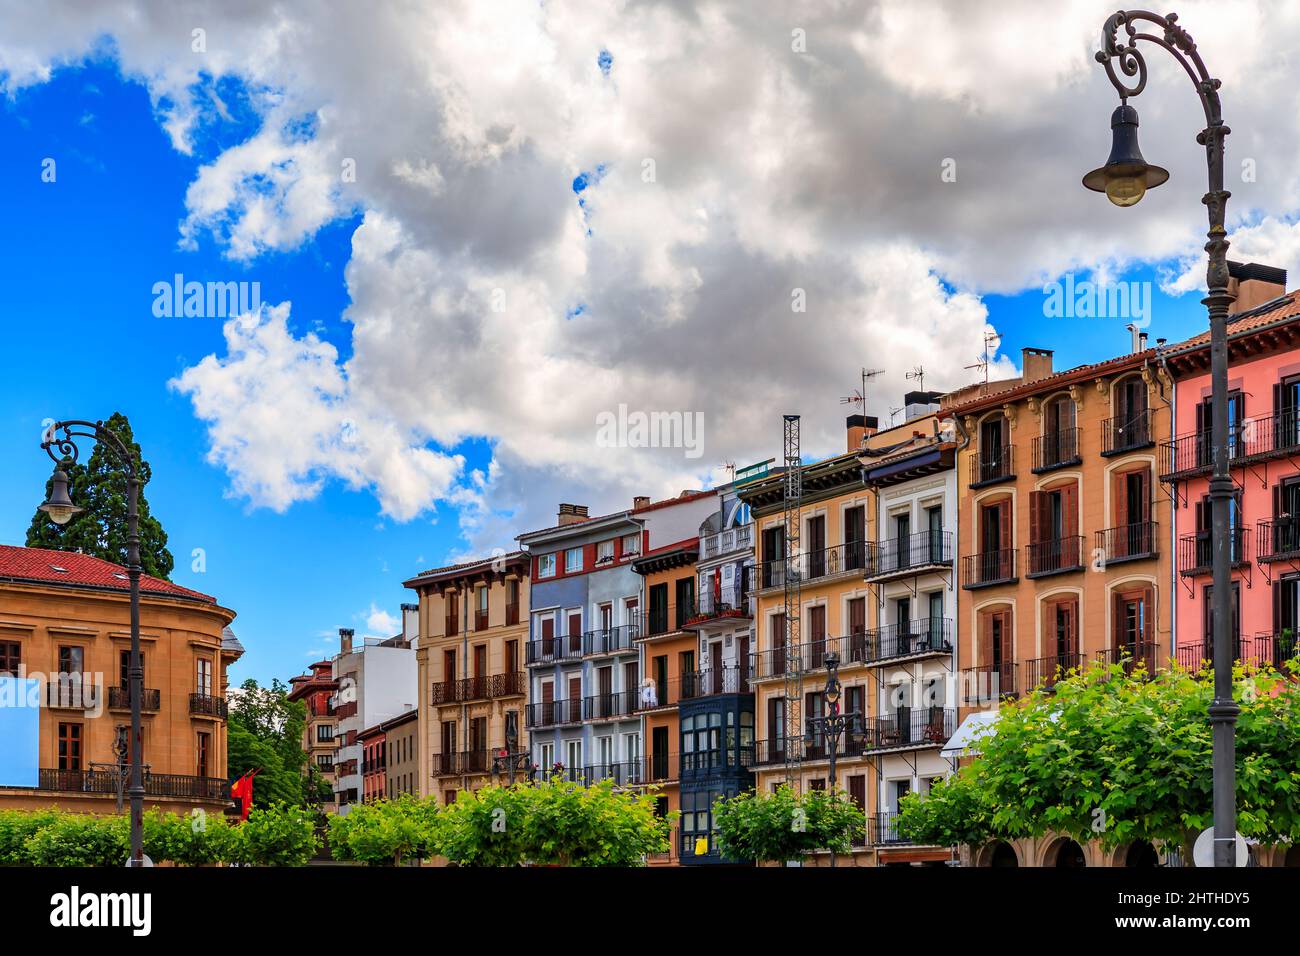 Historic Plaza del Castillo with restaurants and a central domed gazebo in Old Town, famous for running of the bulls in Pamplona, Spain Stock Photo